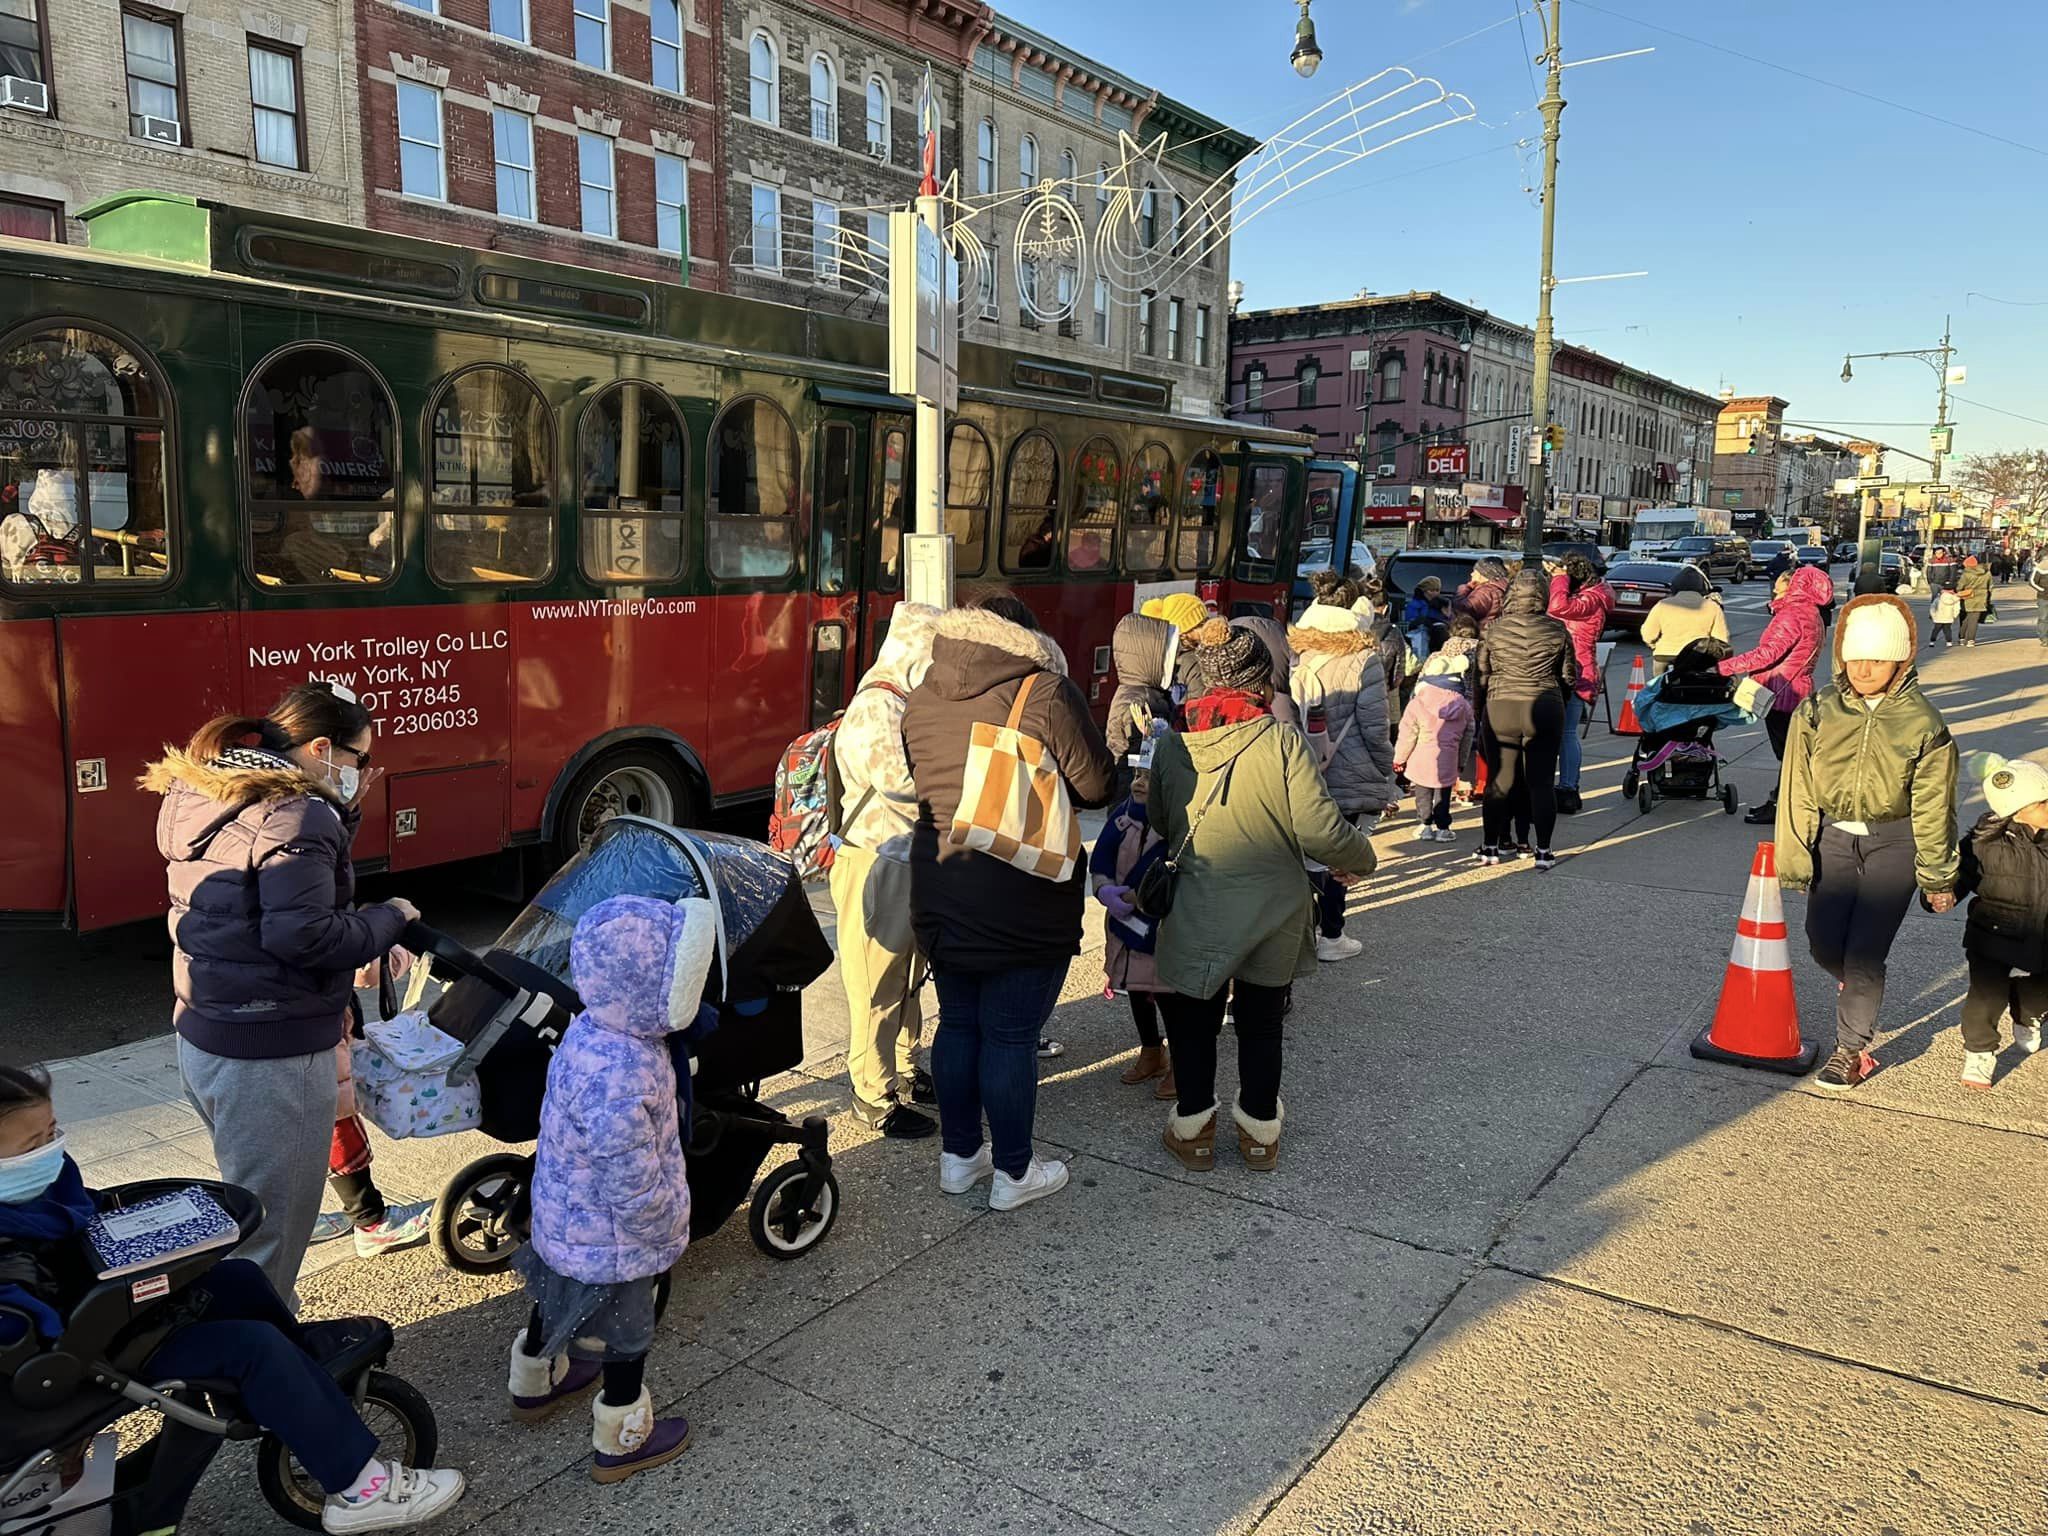 People boarding a red new york trolley co. bus on a sunny day in a busy street, with several passengers including children and strollers visible.